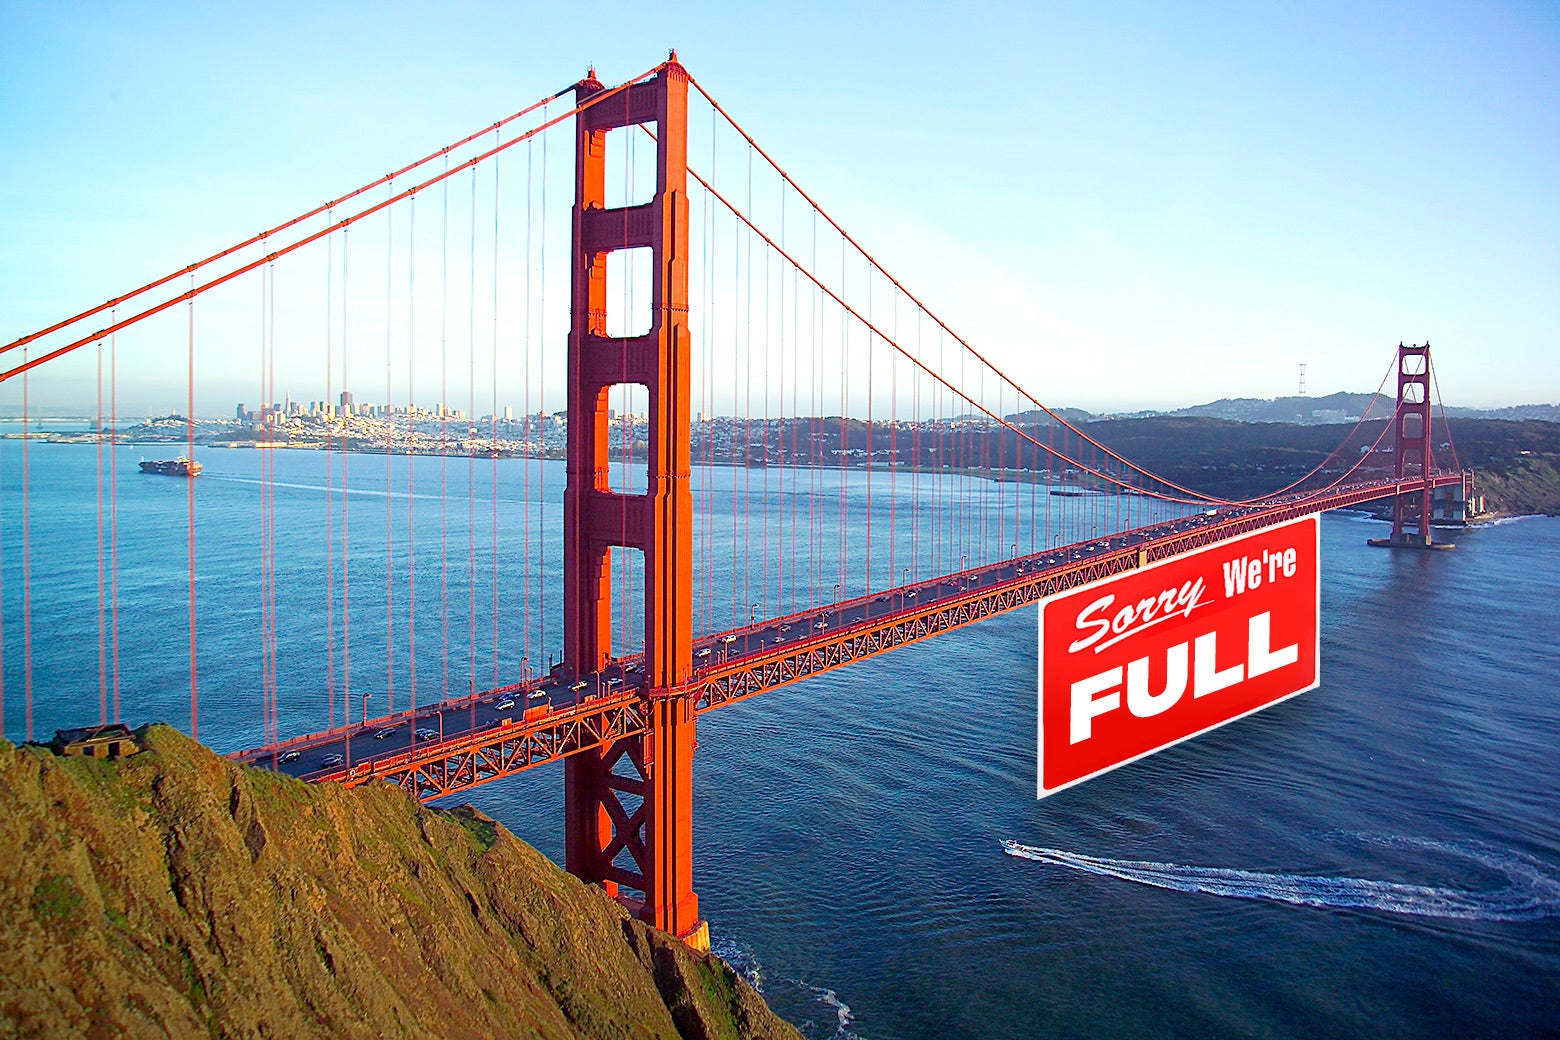 The Golden Gate Bridge with a "Sorry, We're FULL" sign under it.